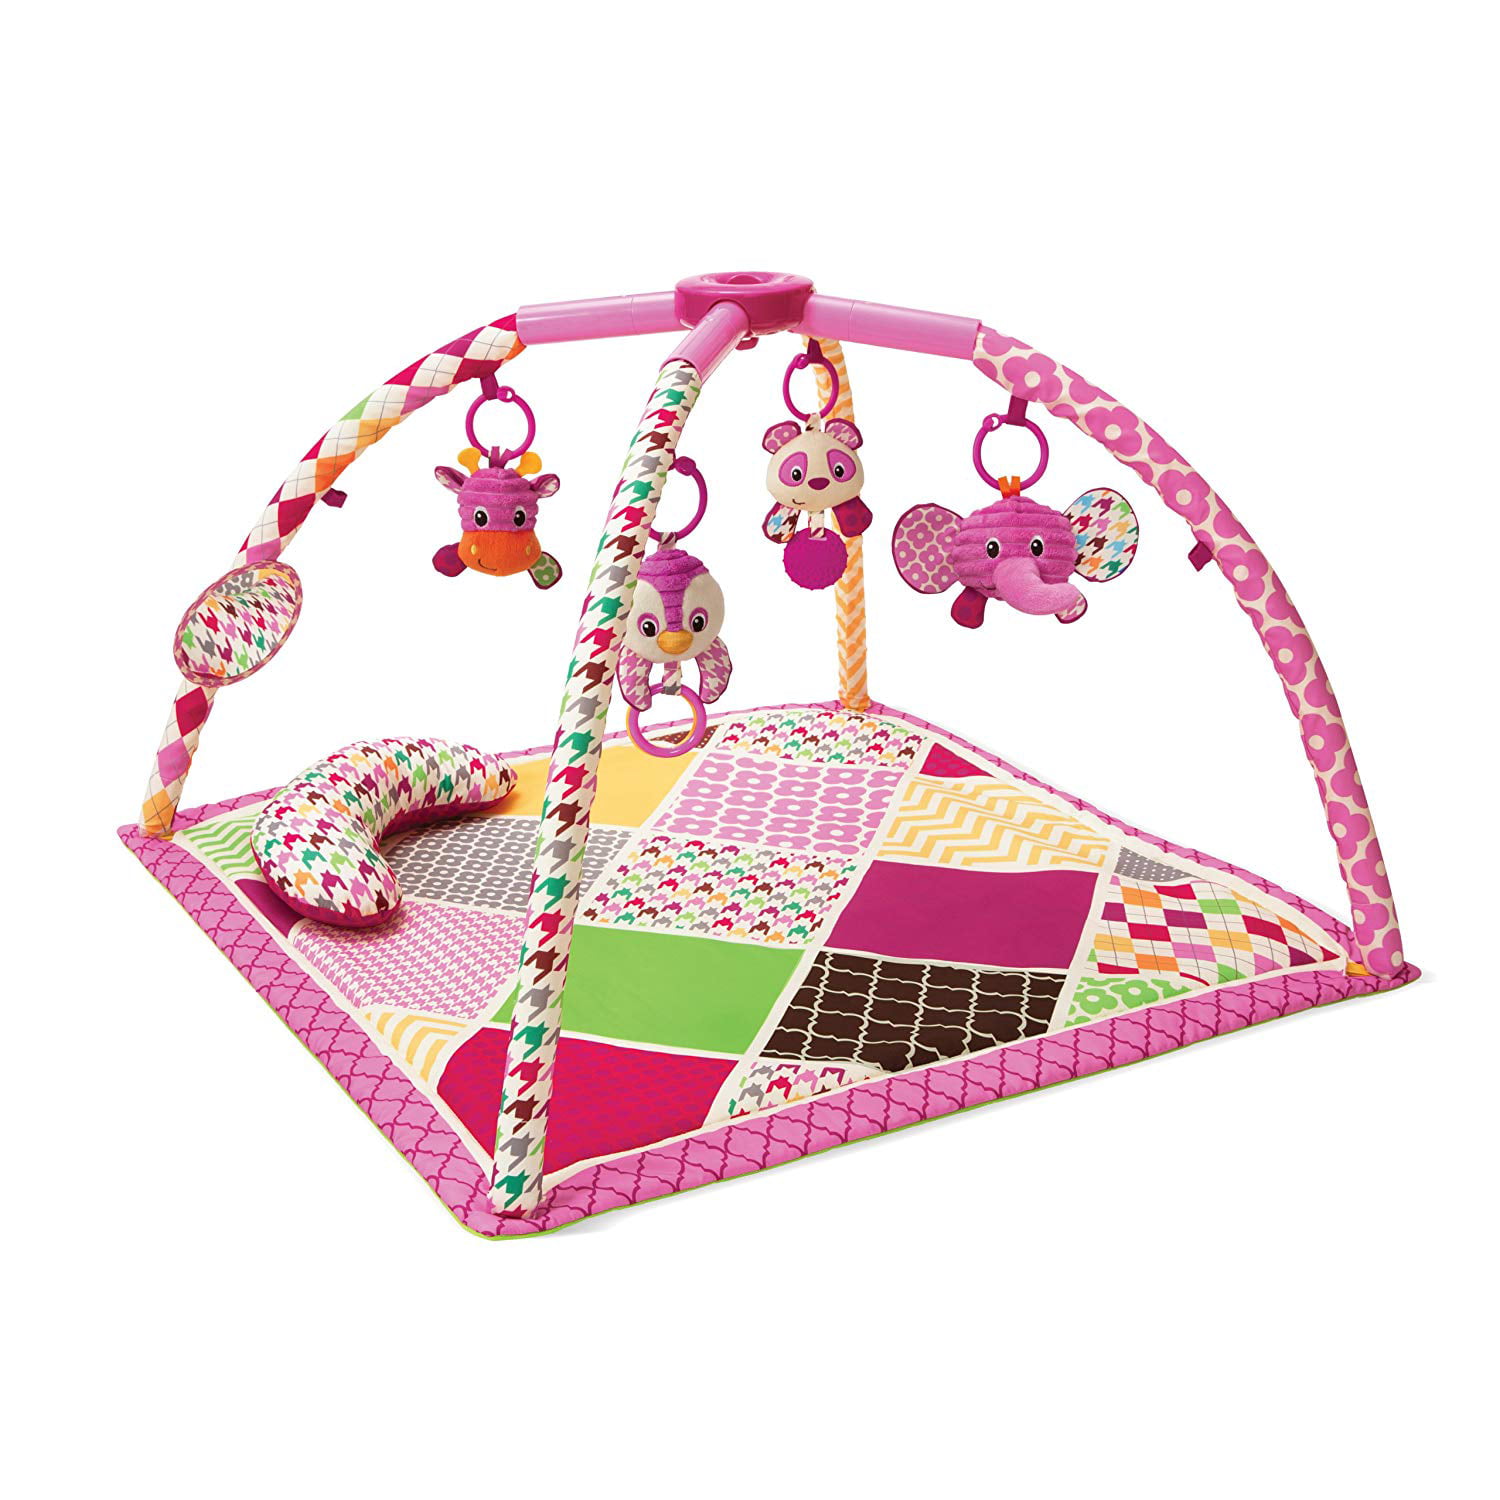 Infantino Go GaGa Deluxe Twist and Fold Activity Gym & Play Mat Music AU 